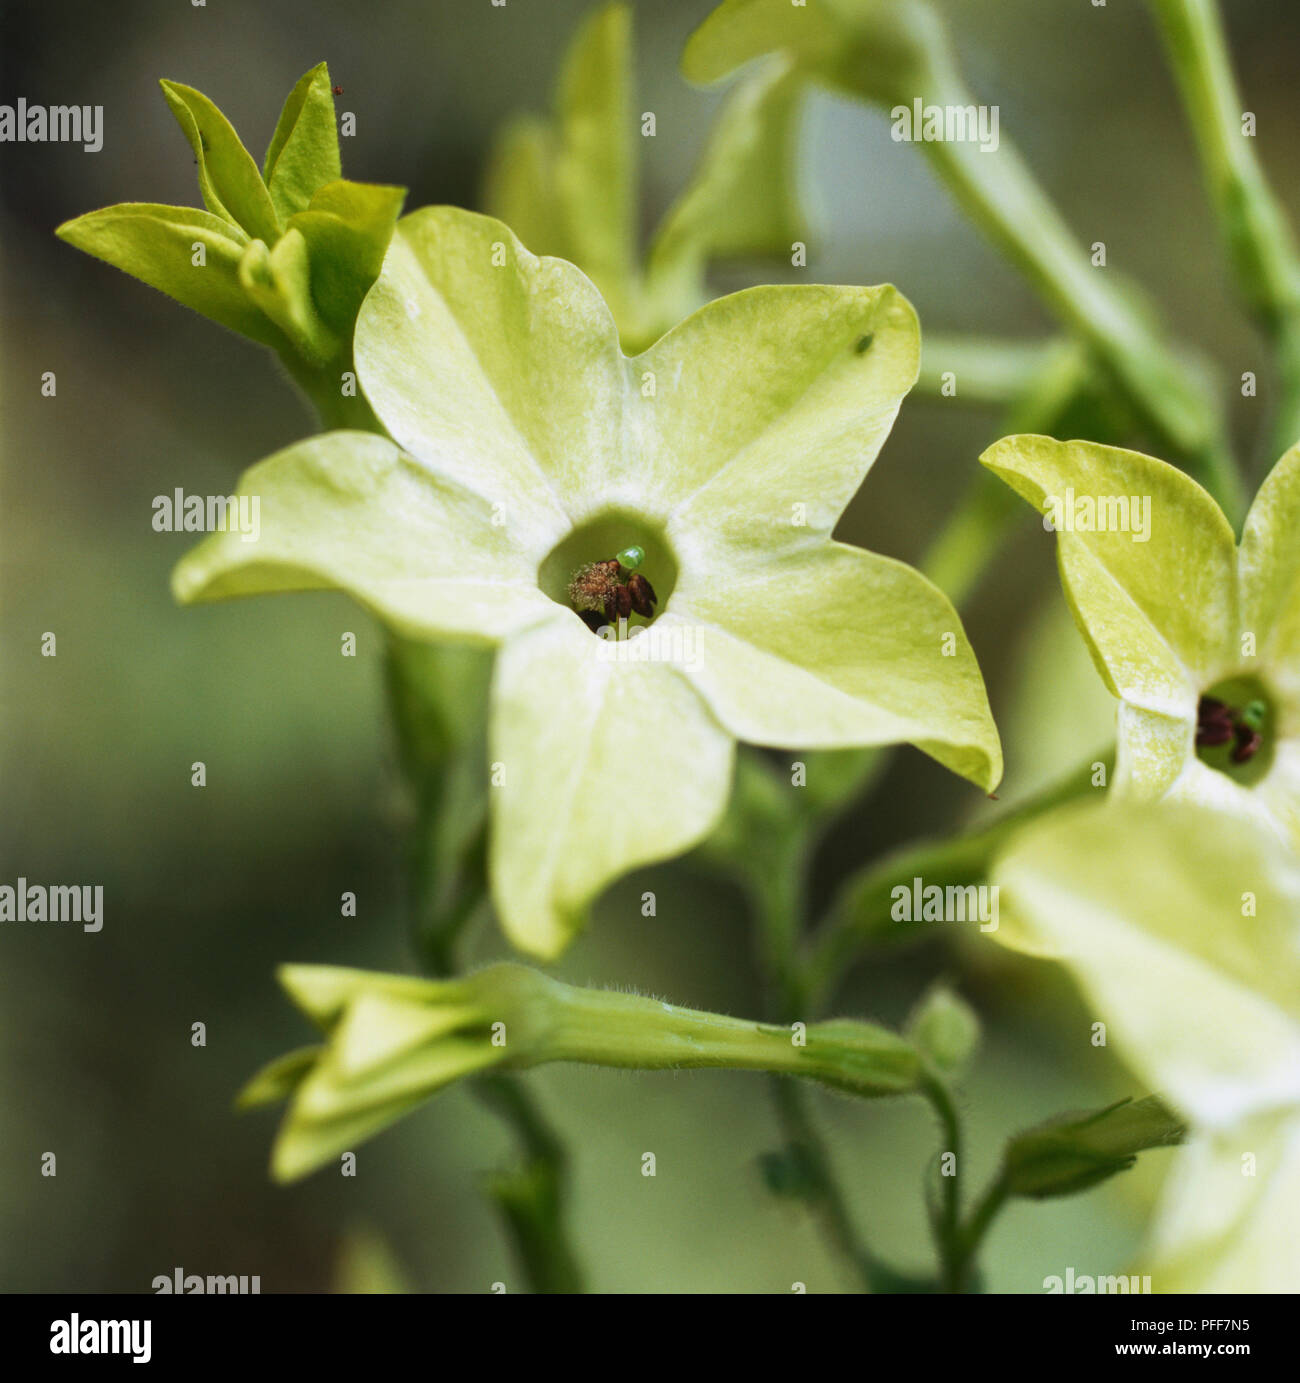 Nicotiana 'Lime Green', star shaped green flower. Stock Photo